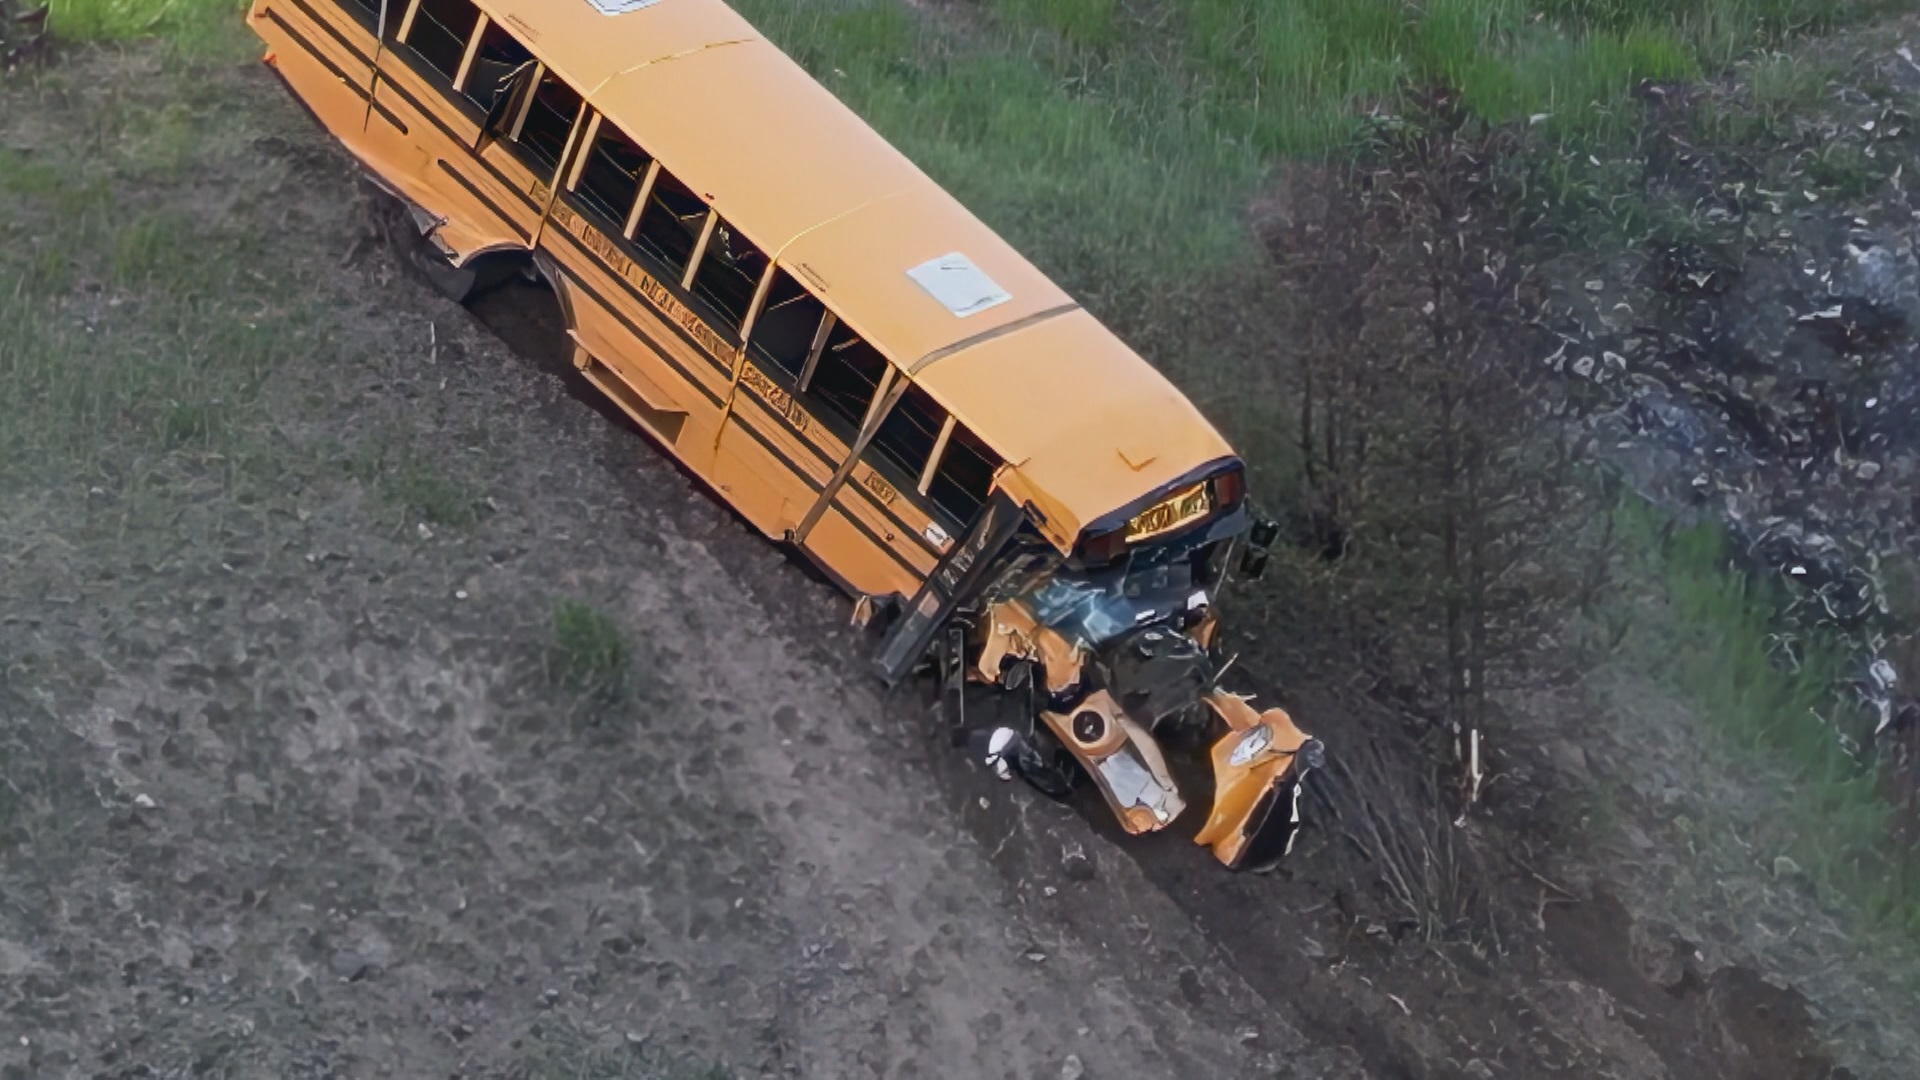 Crashed B.C. school bus was filled with grade 6s, 7s, superintendent says